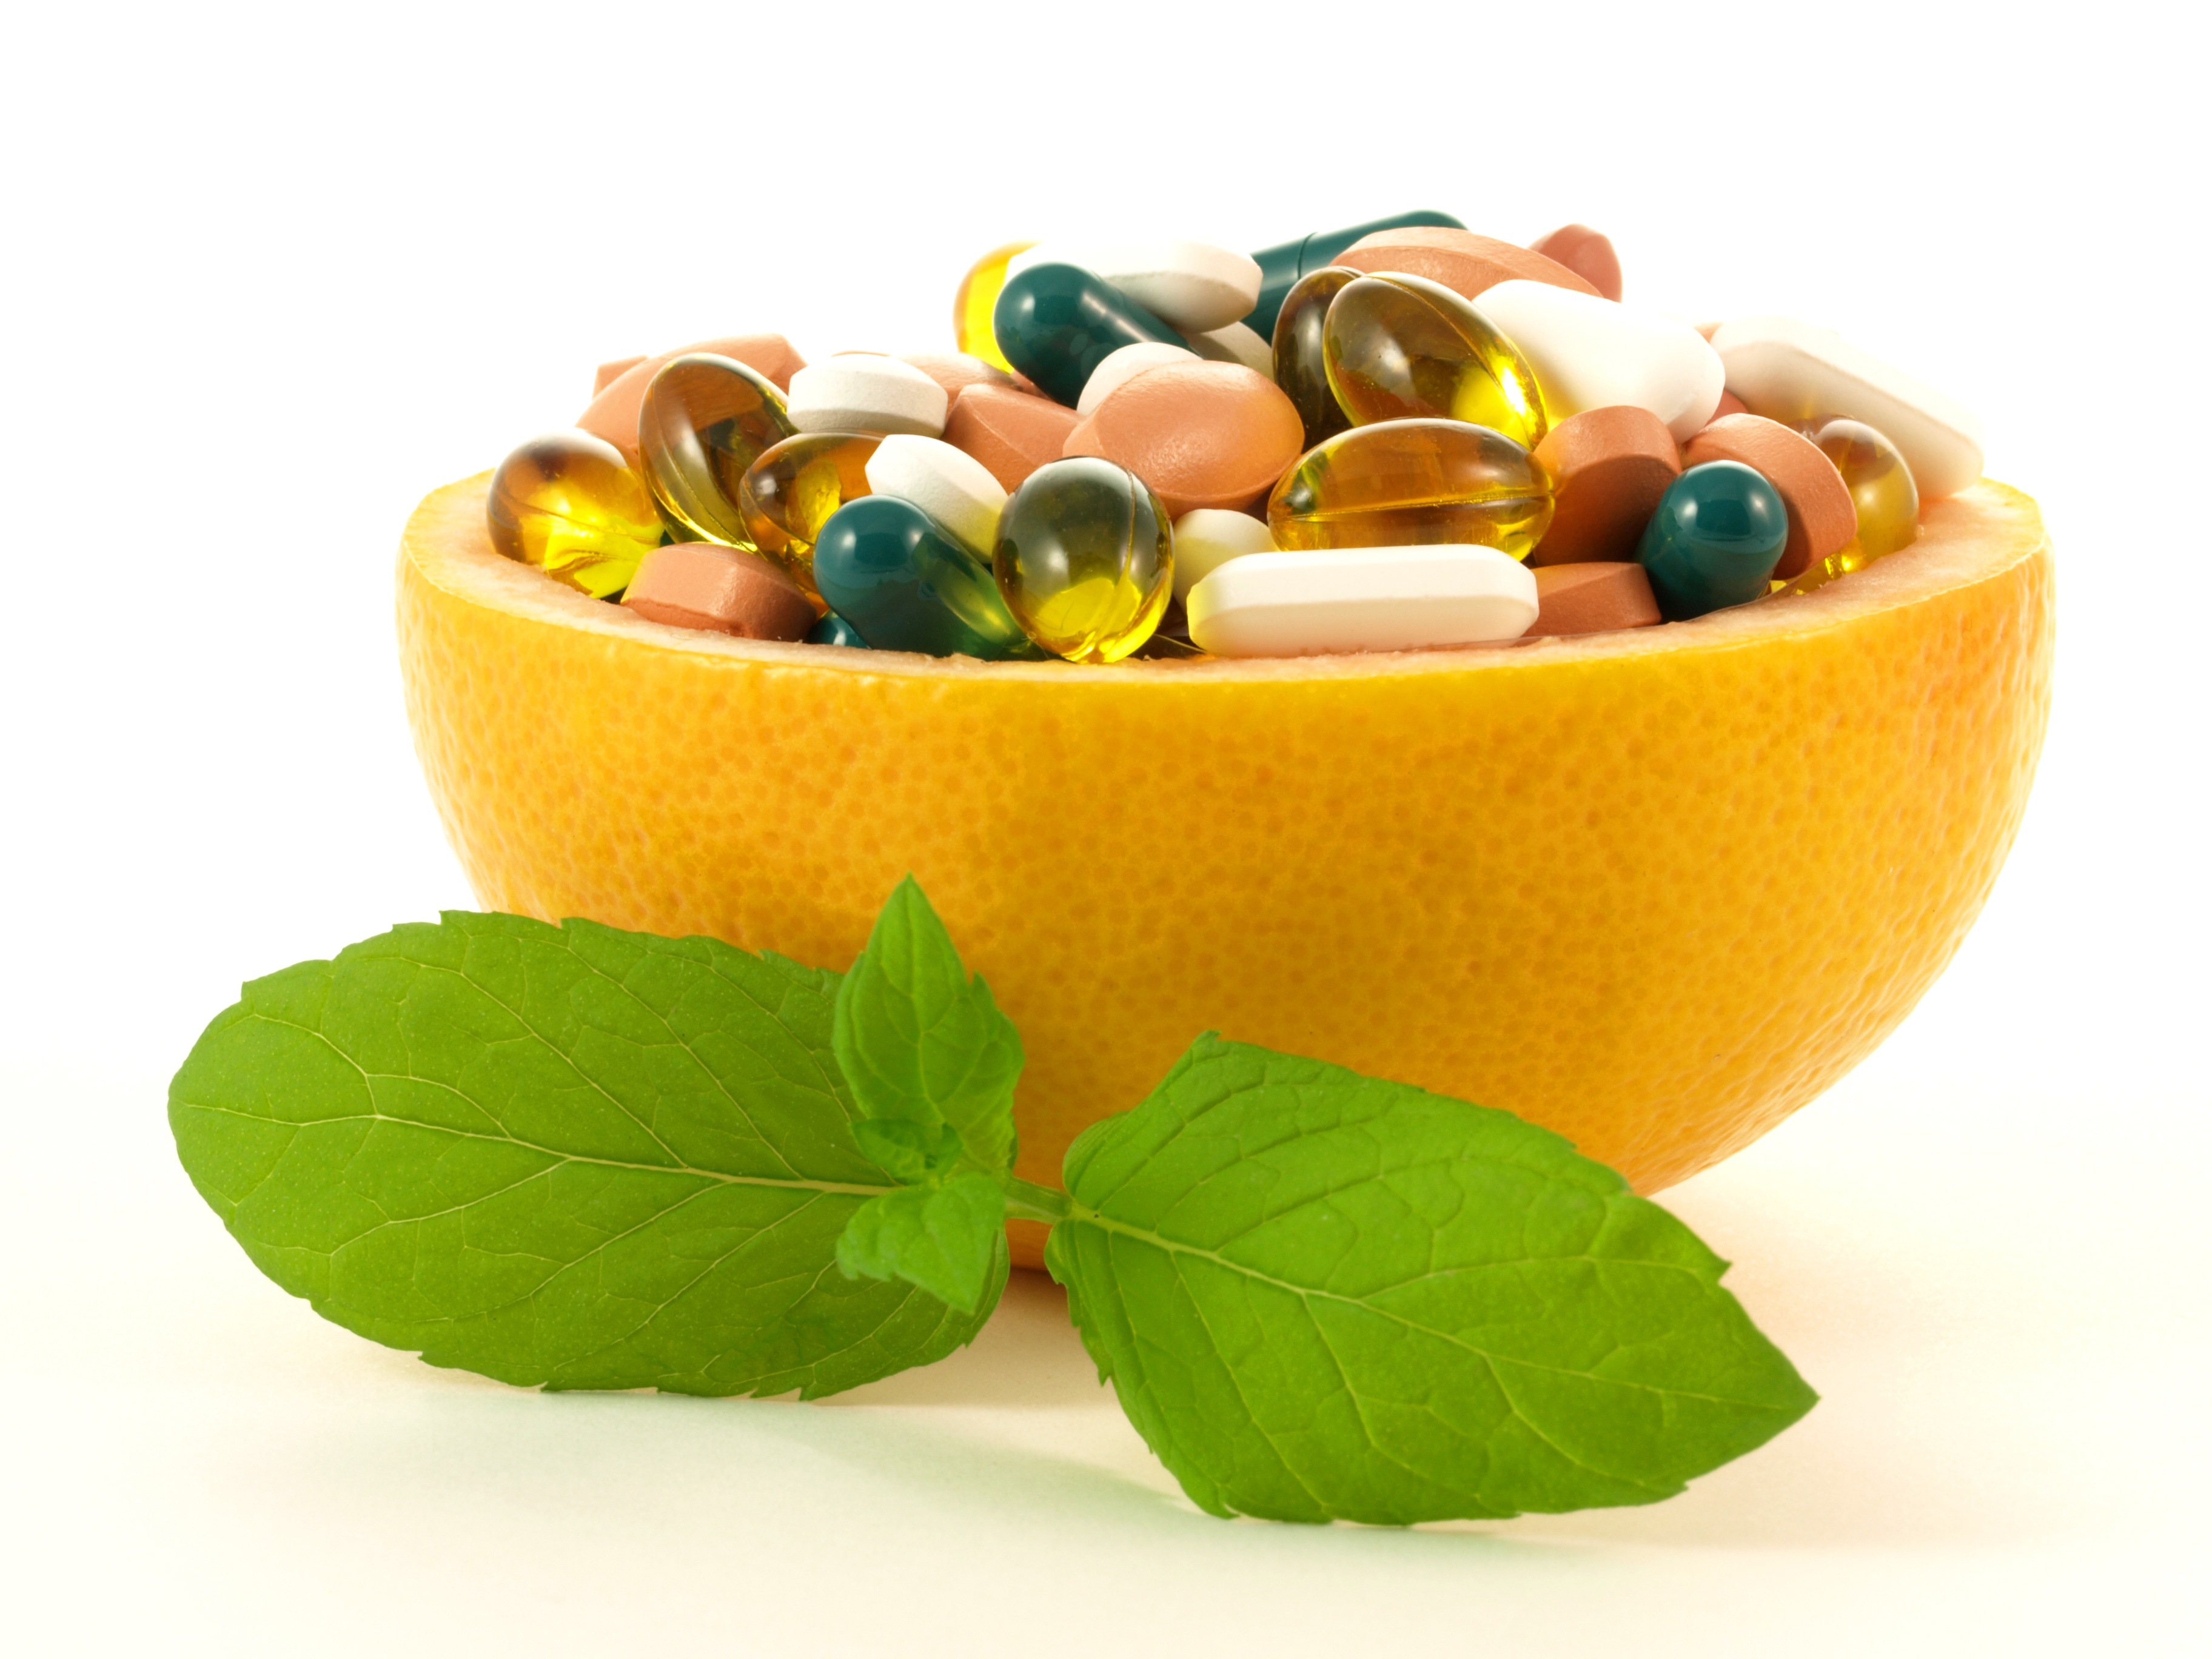 Fruits full of vitamin pills on isolated background.